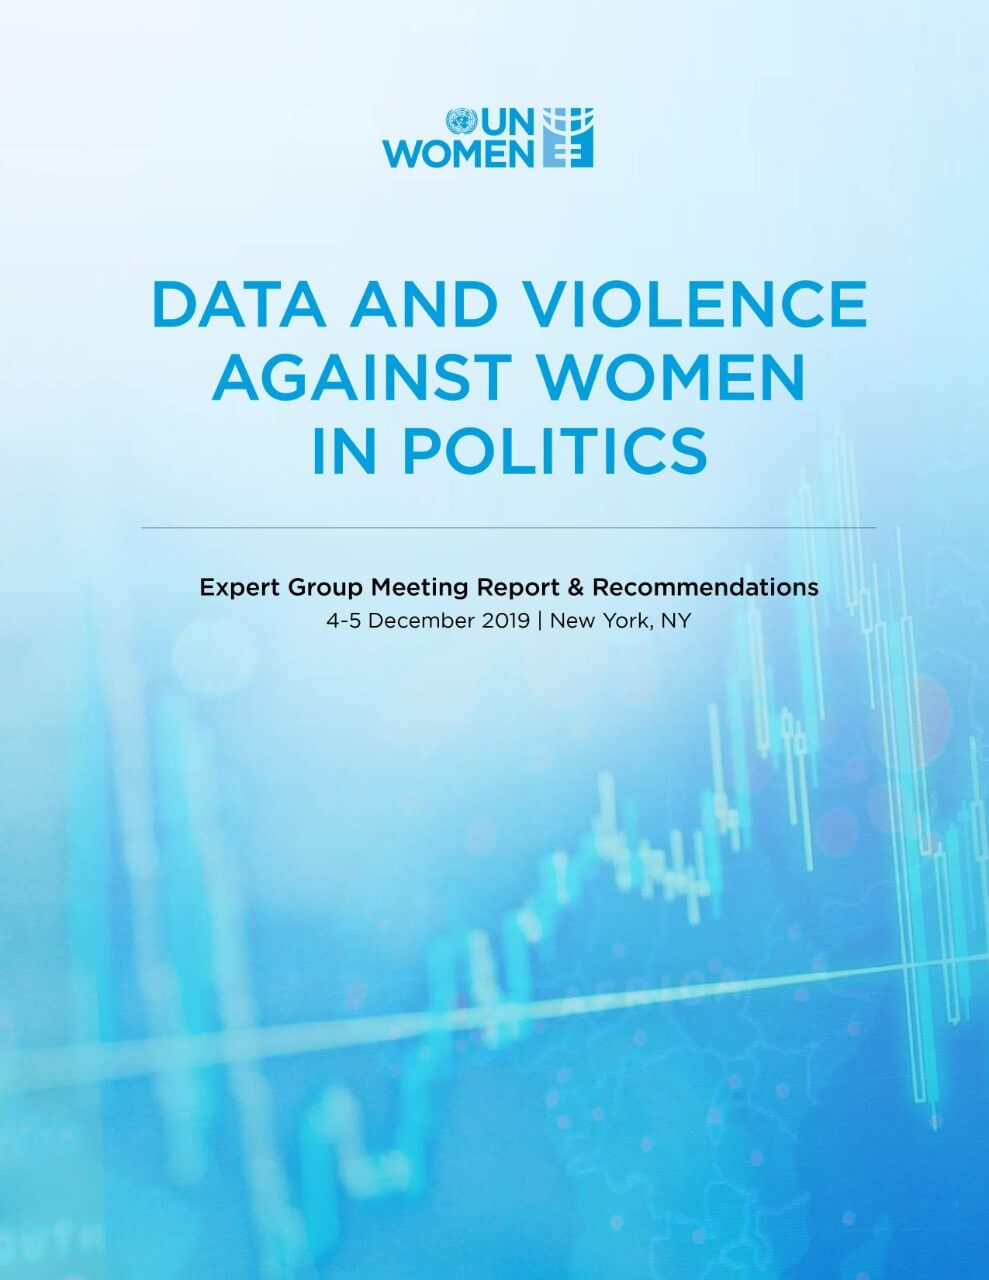 Data and violence against women in politics: Expert group meeting report and recommendations